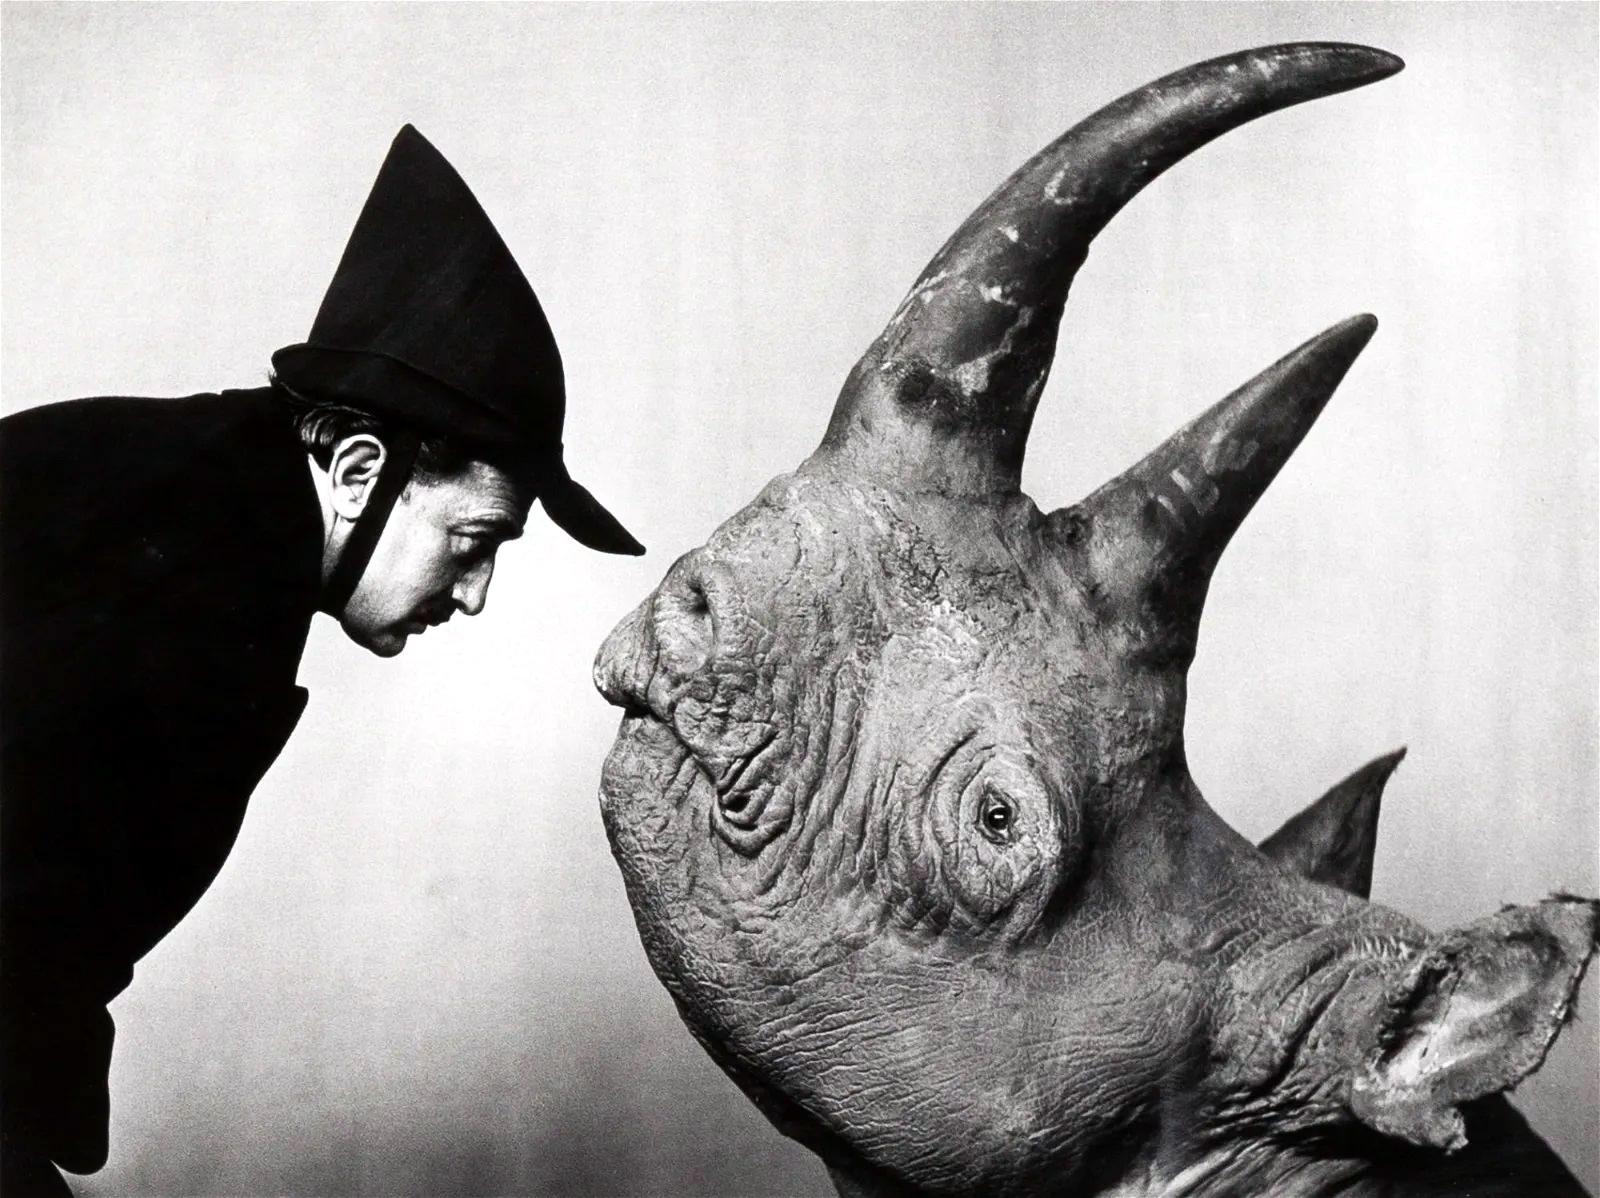 Artist: Philippe Halsman (1906-1979)
Medium: Gelatin silver print
Title: Dalí with Rhinoceros
Date: 1956; Printed in 1981 as part of the ten-piece Dali Portfolio by Stephen Gersh and the Neikrug Press under the supervision of Halsman's widow